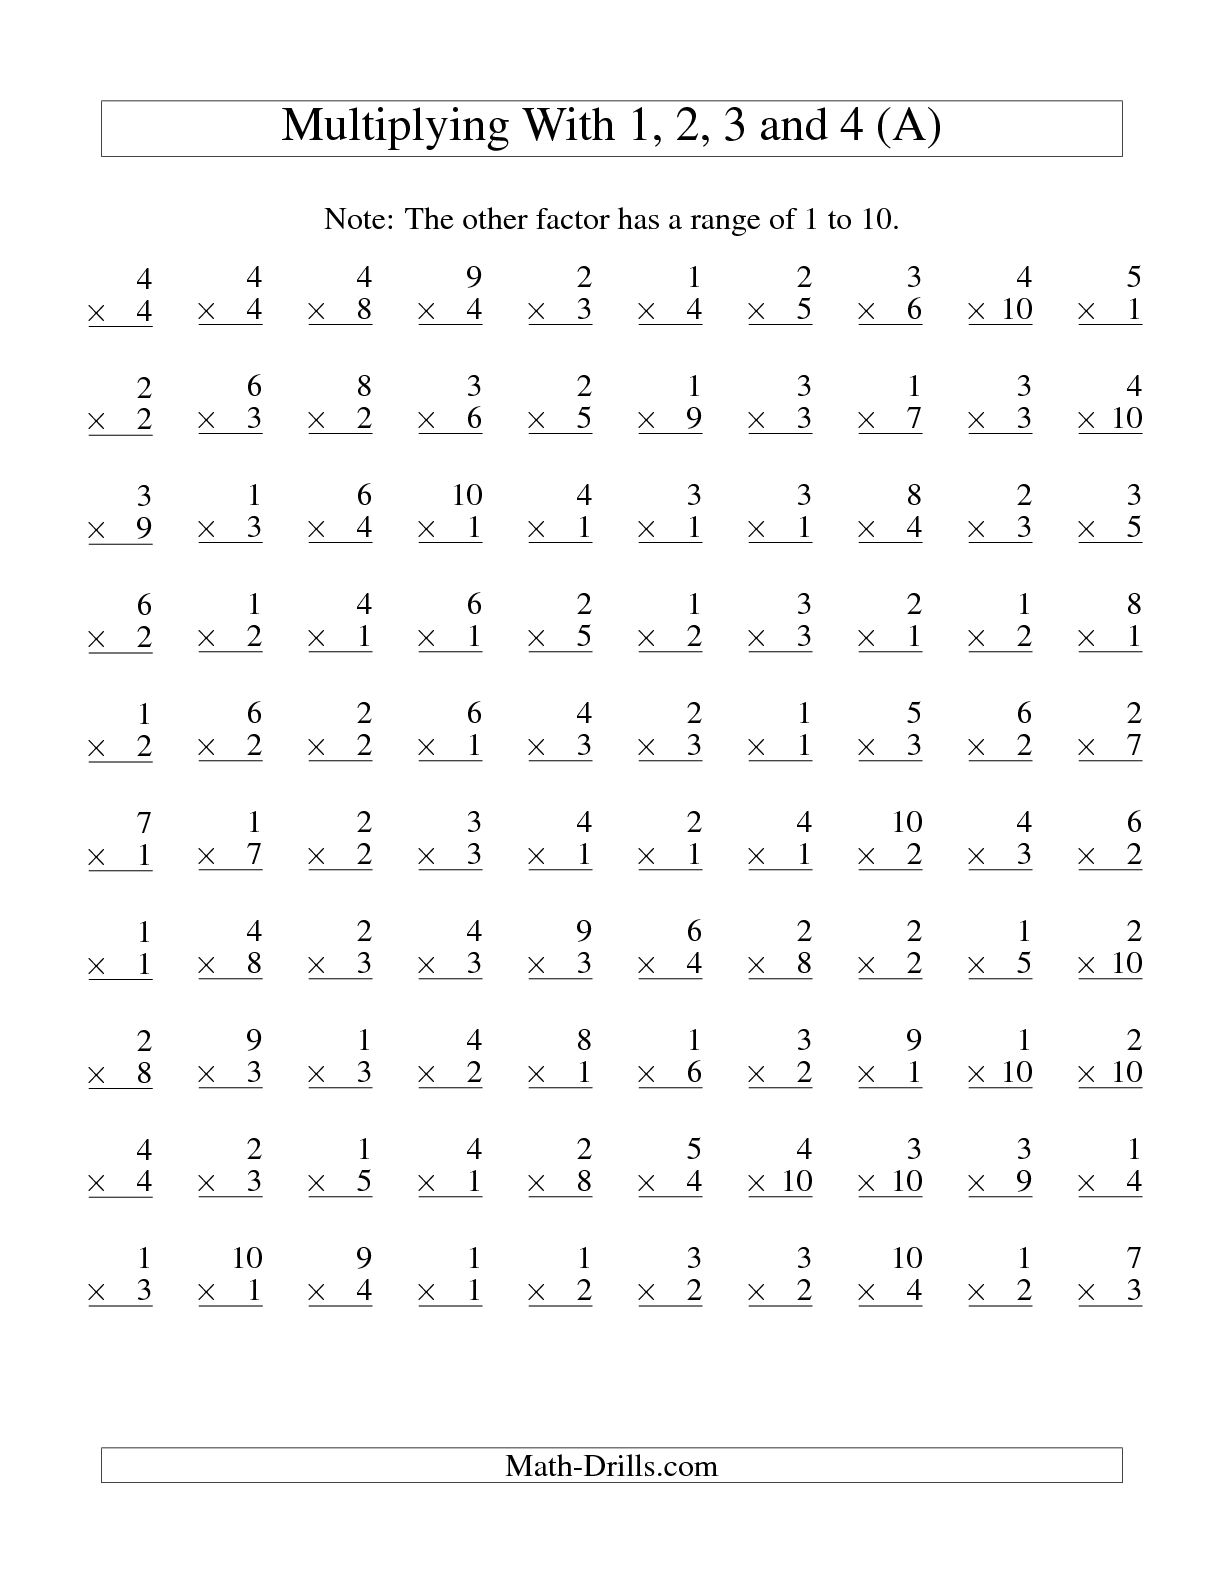 Multiplication Facts Up To 10 Worksheets